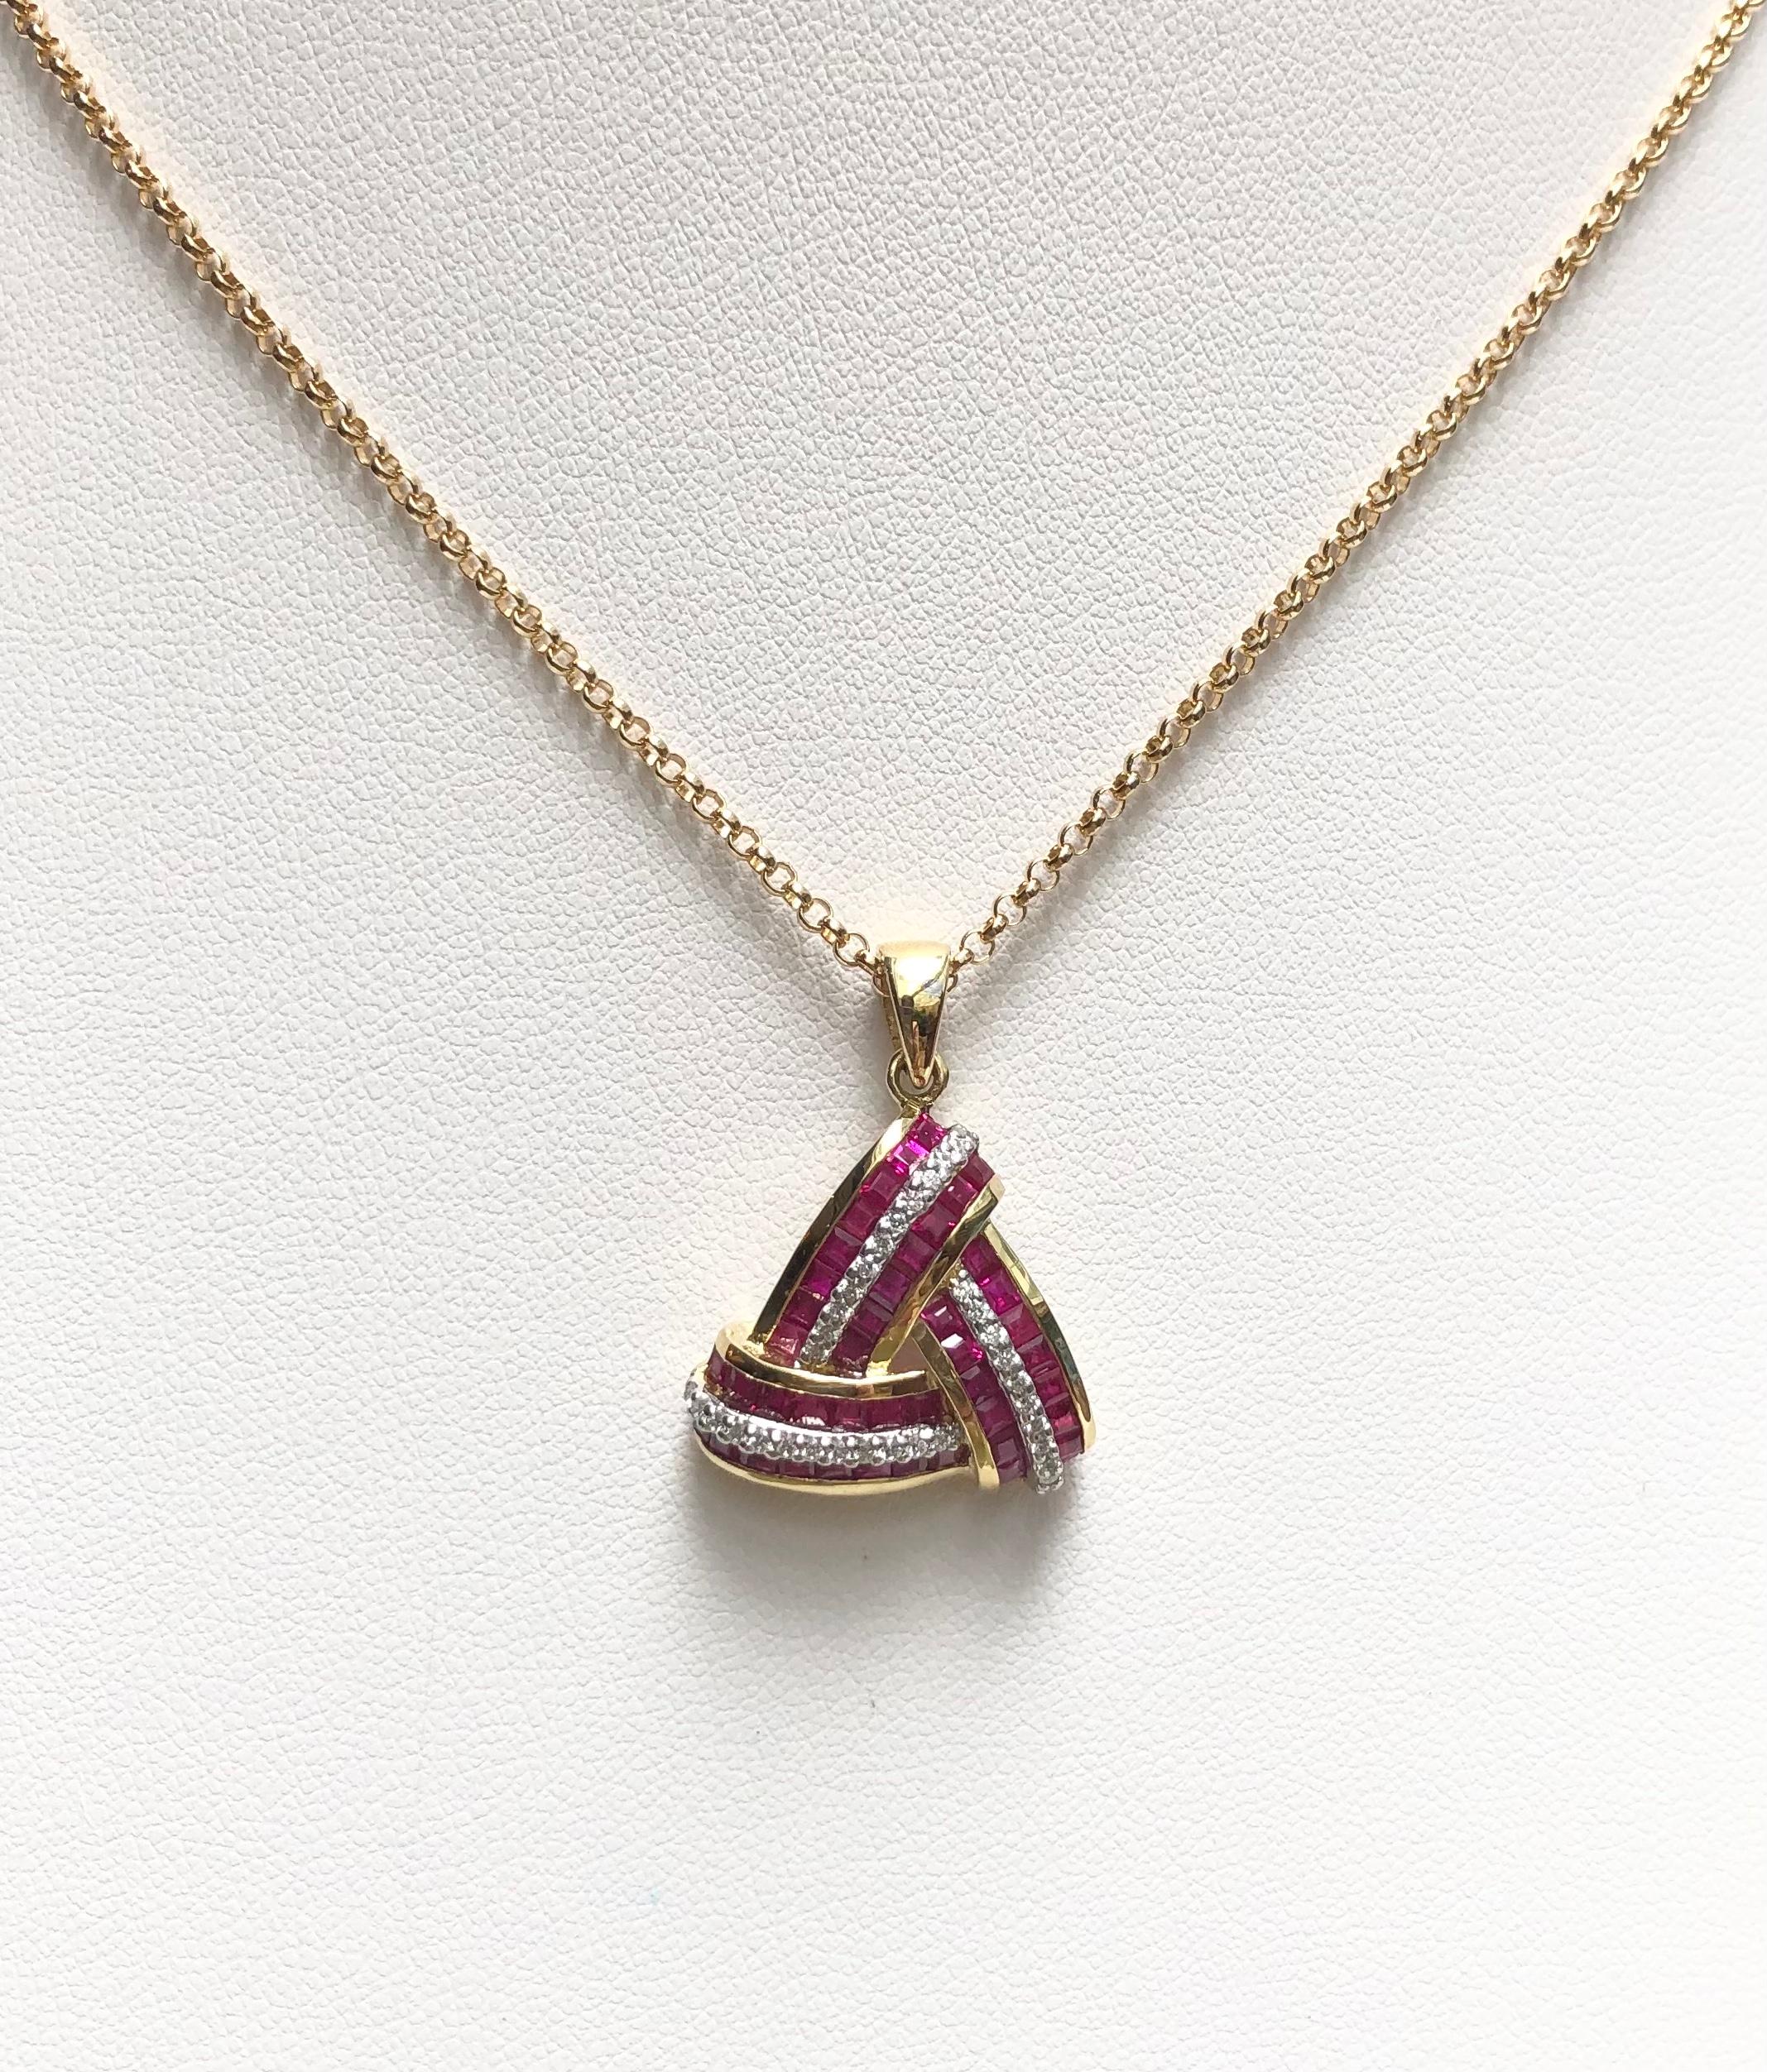 Ruby 2.15 carats with Diamond 0.20 carat Pendant set in 18 Karat Gold Settings
(chain not included)

Width:  1.9 cm 
Length: 2.6 cm
Total Weight: 5.04 grams

